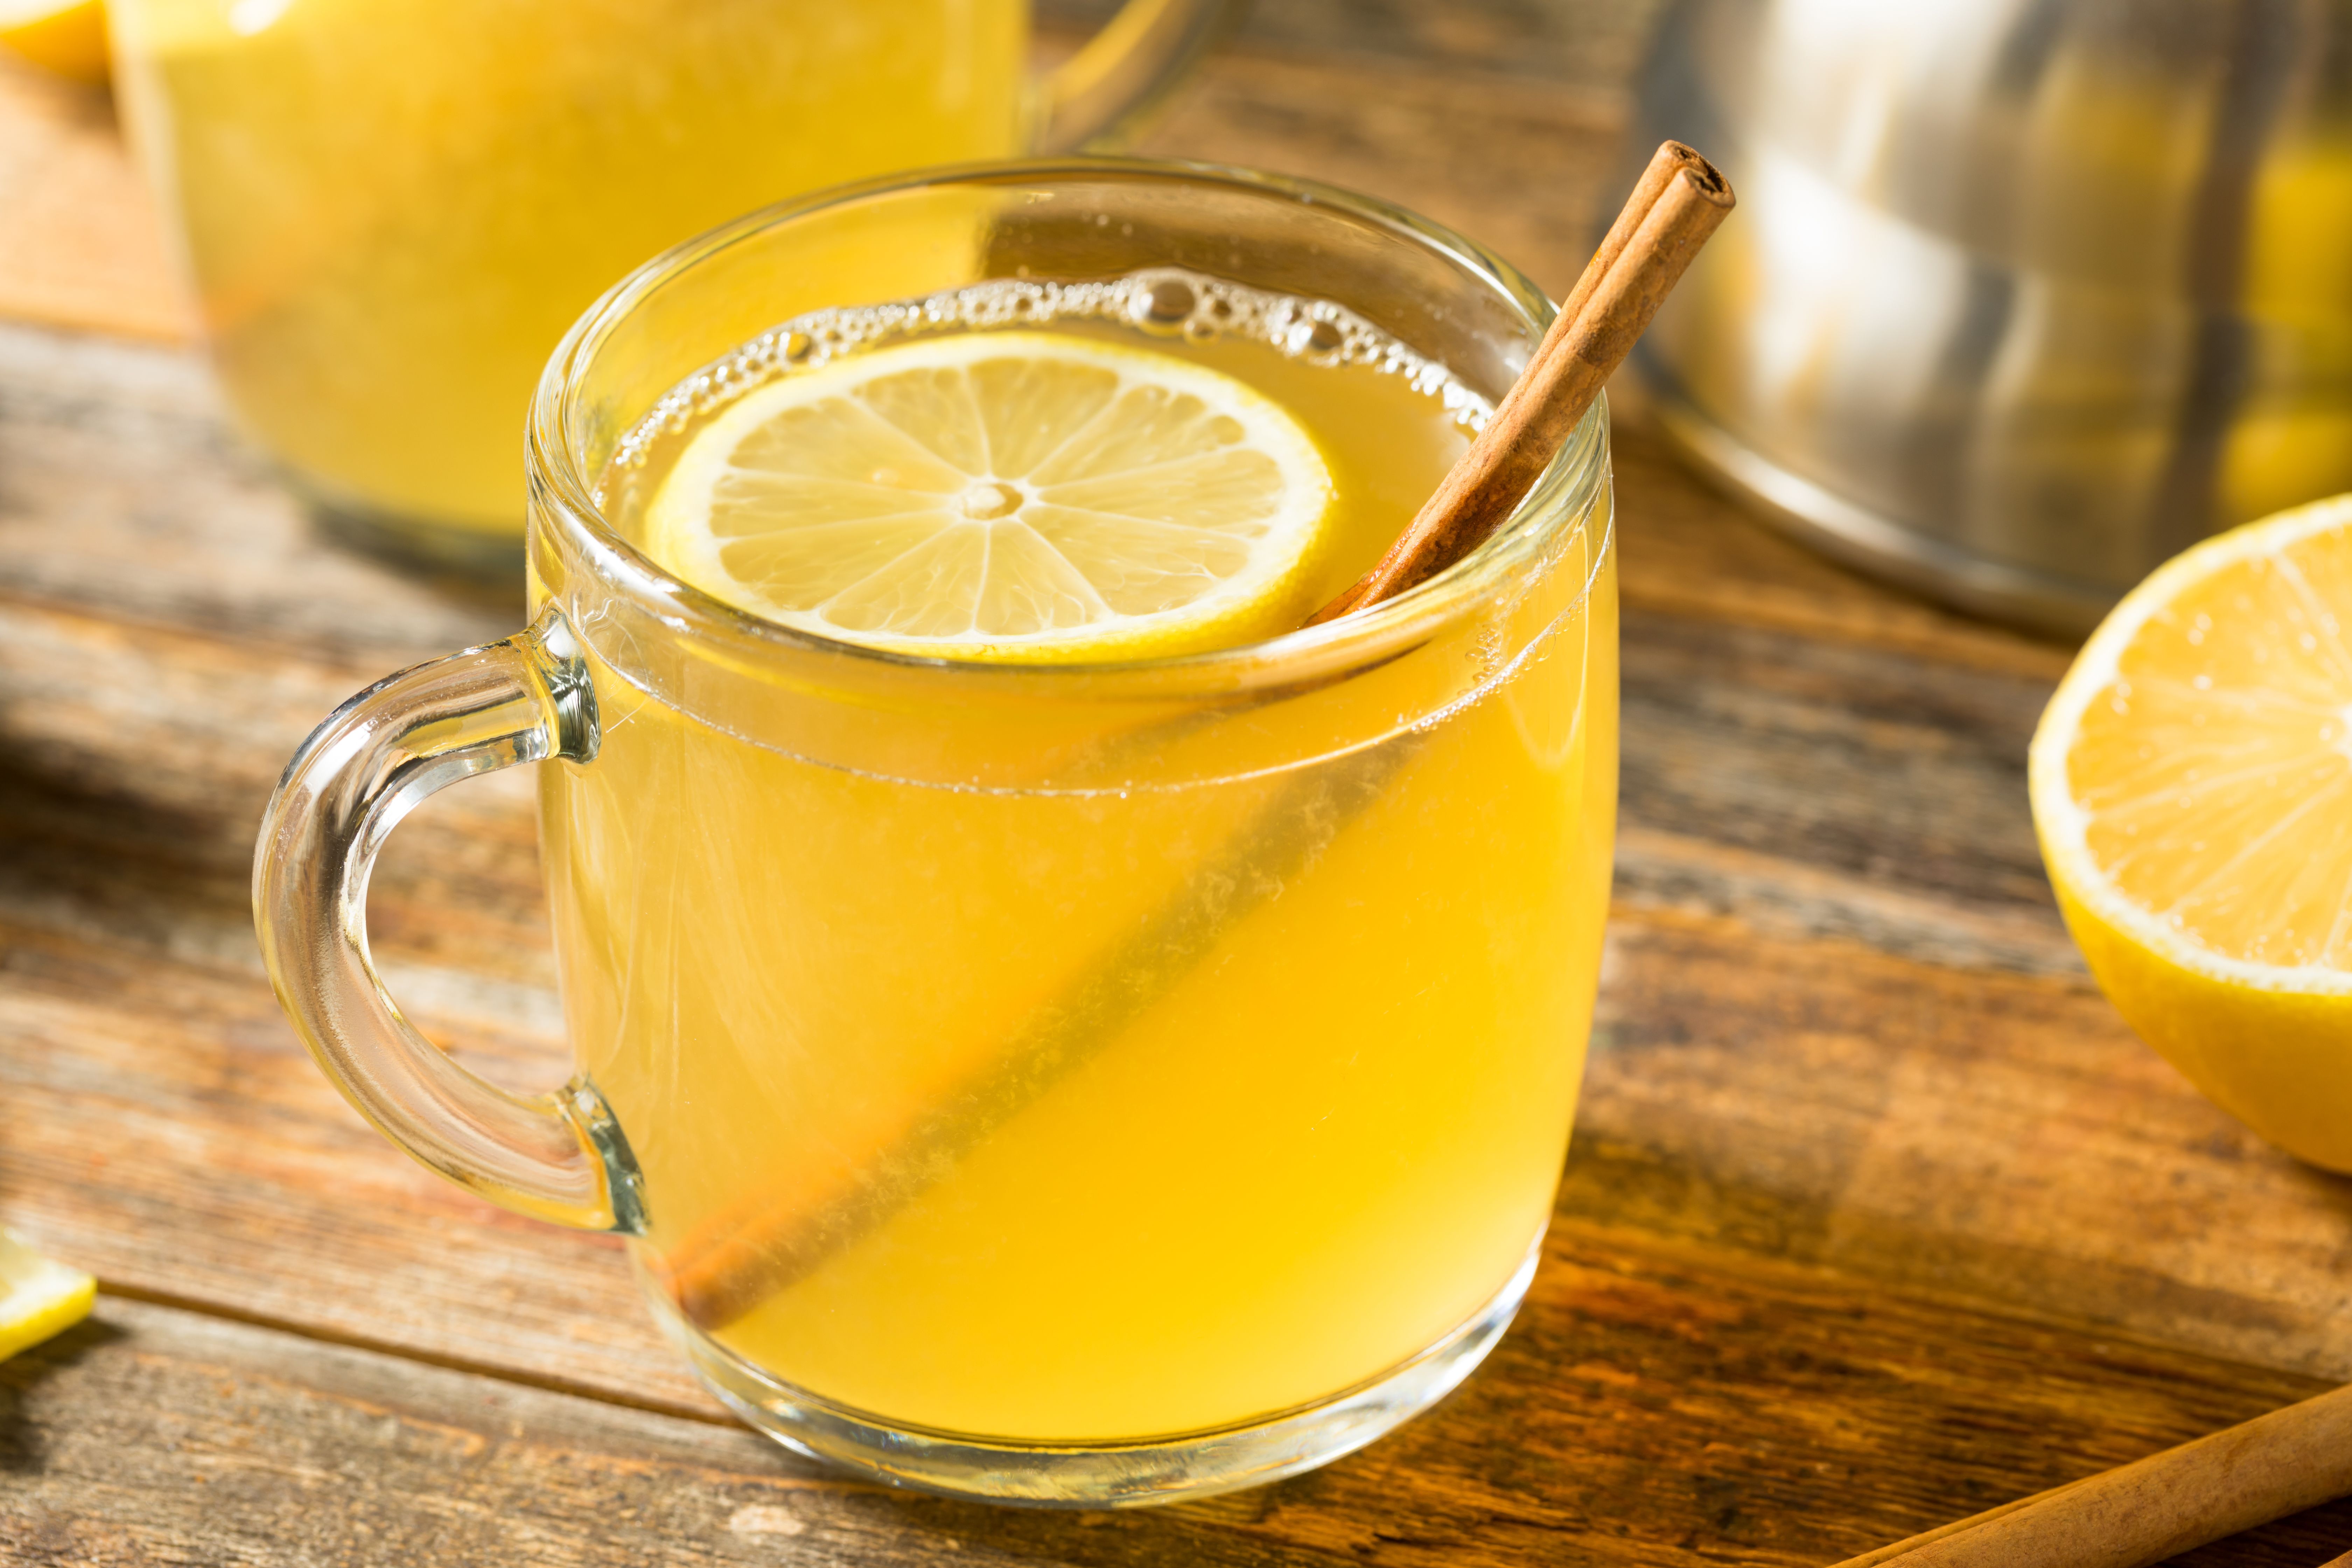 Cocktail Masterclass: Hot Toddy Sponsored by Longbranch Whiskey